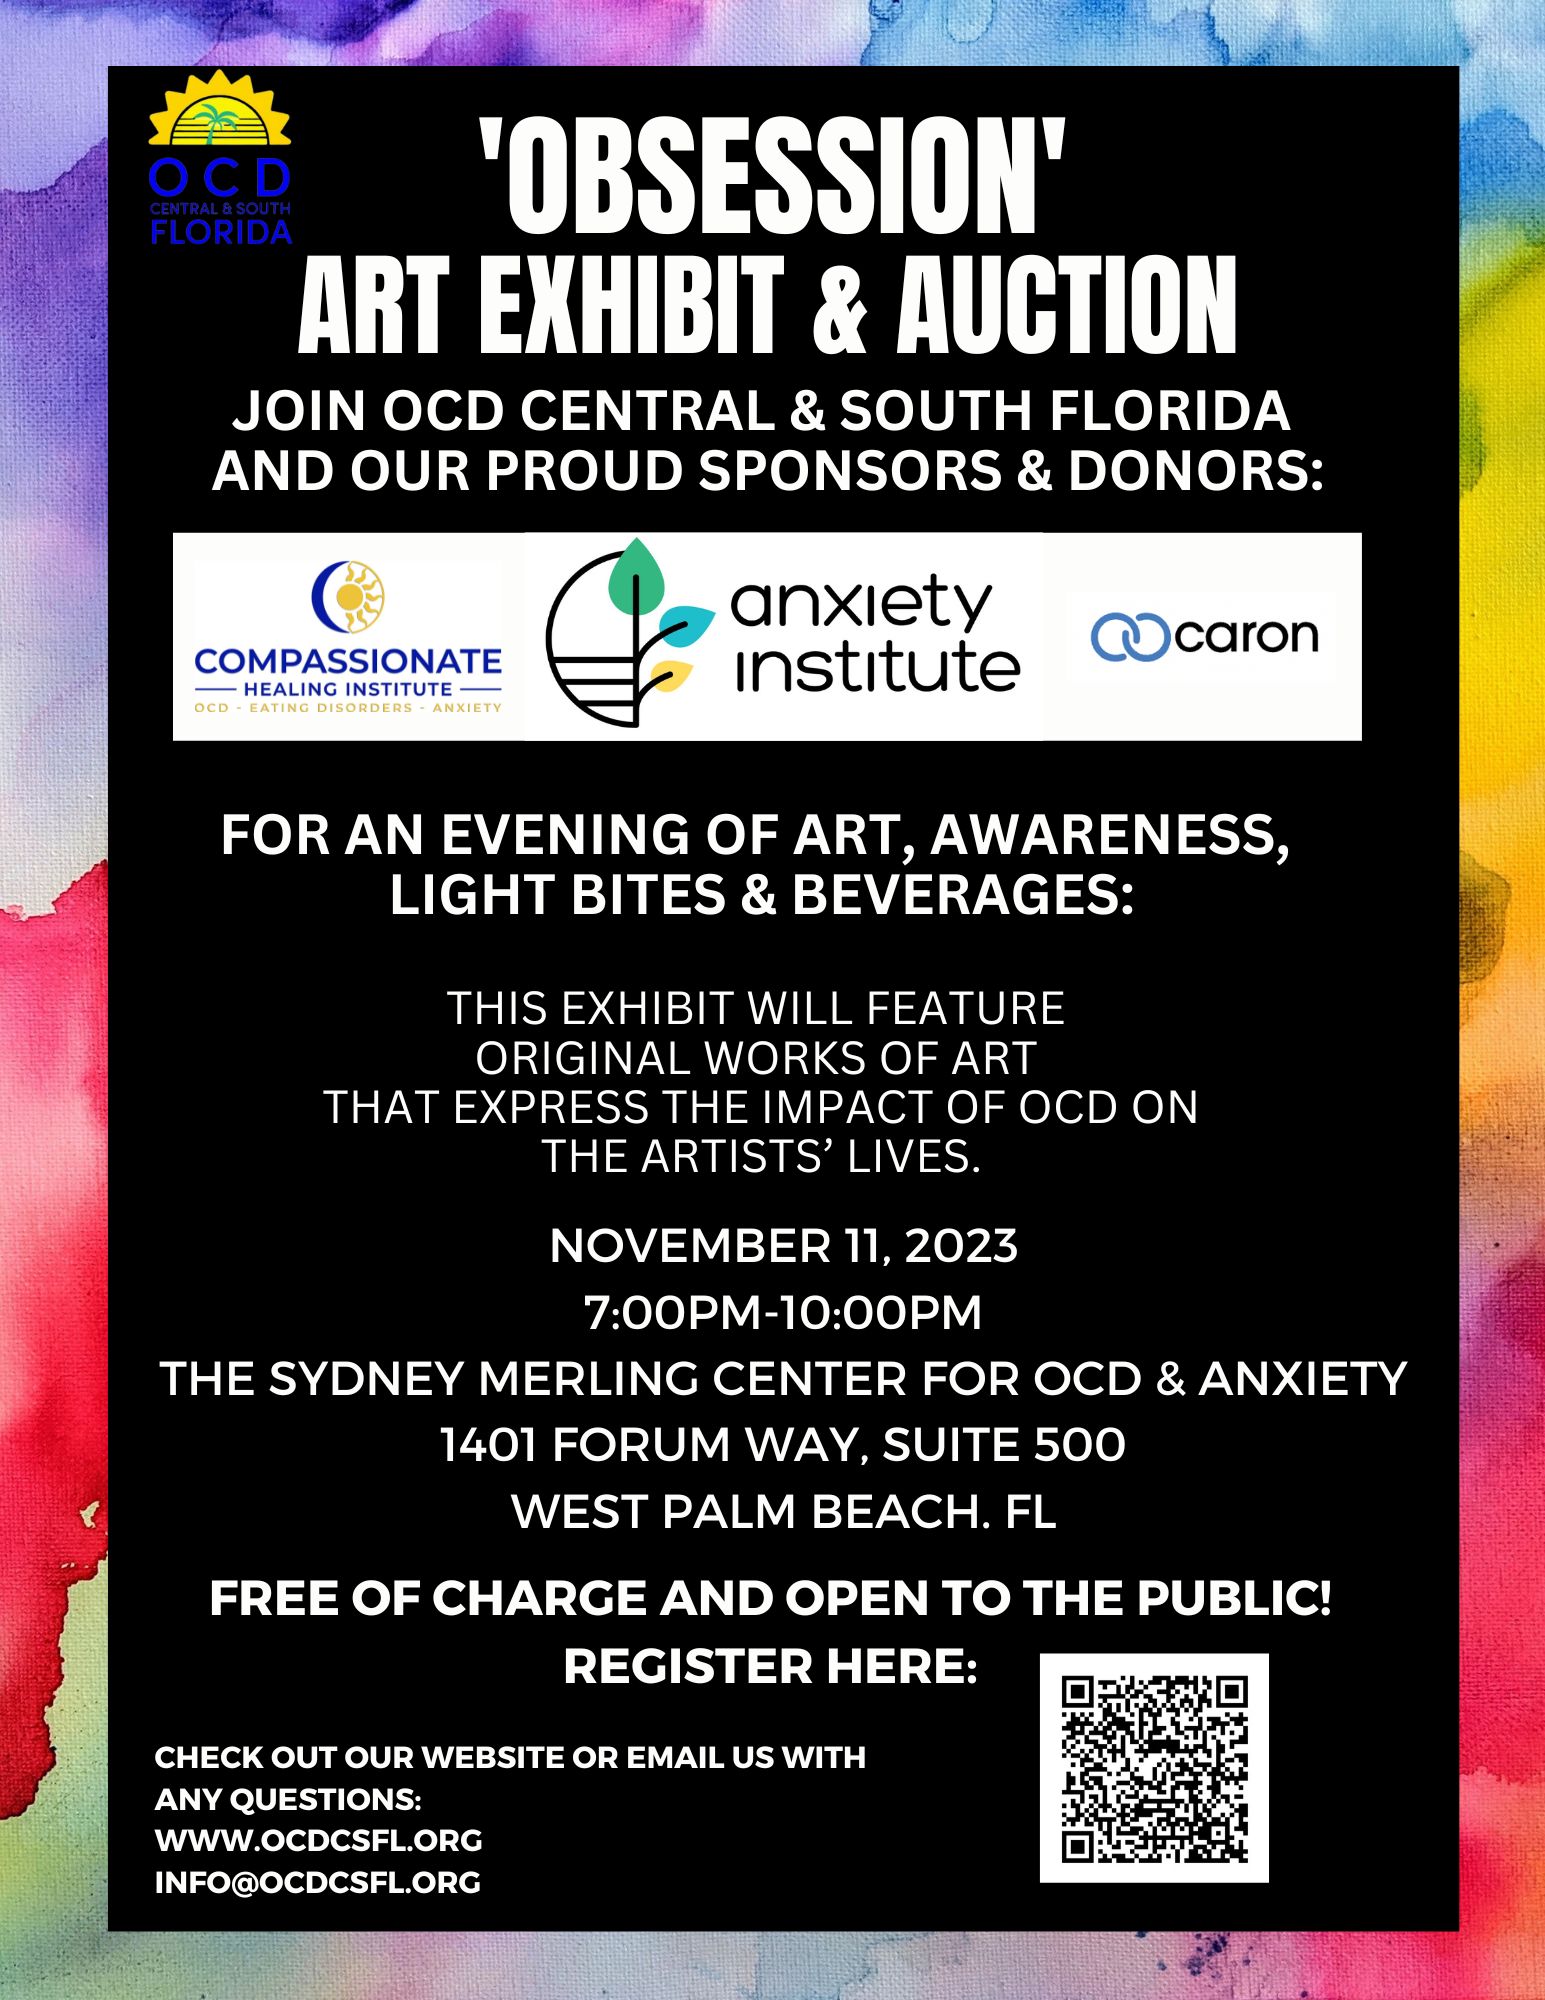 ‘Obsession’ Art Exhibit and Auction